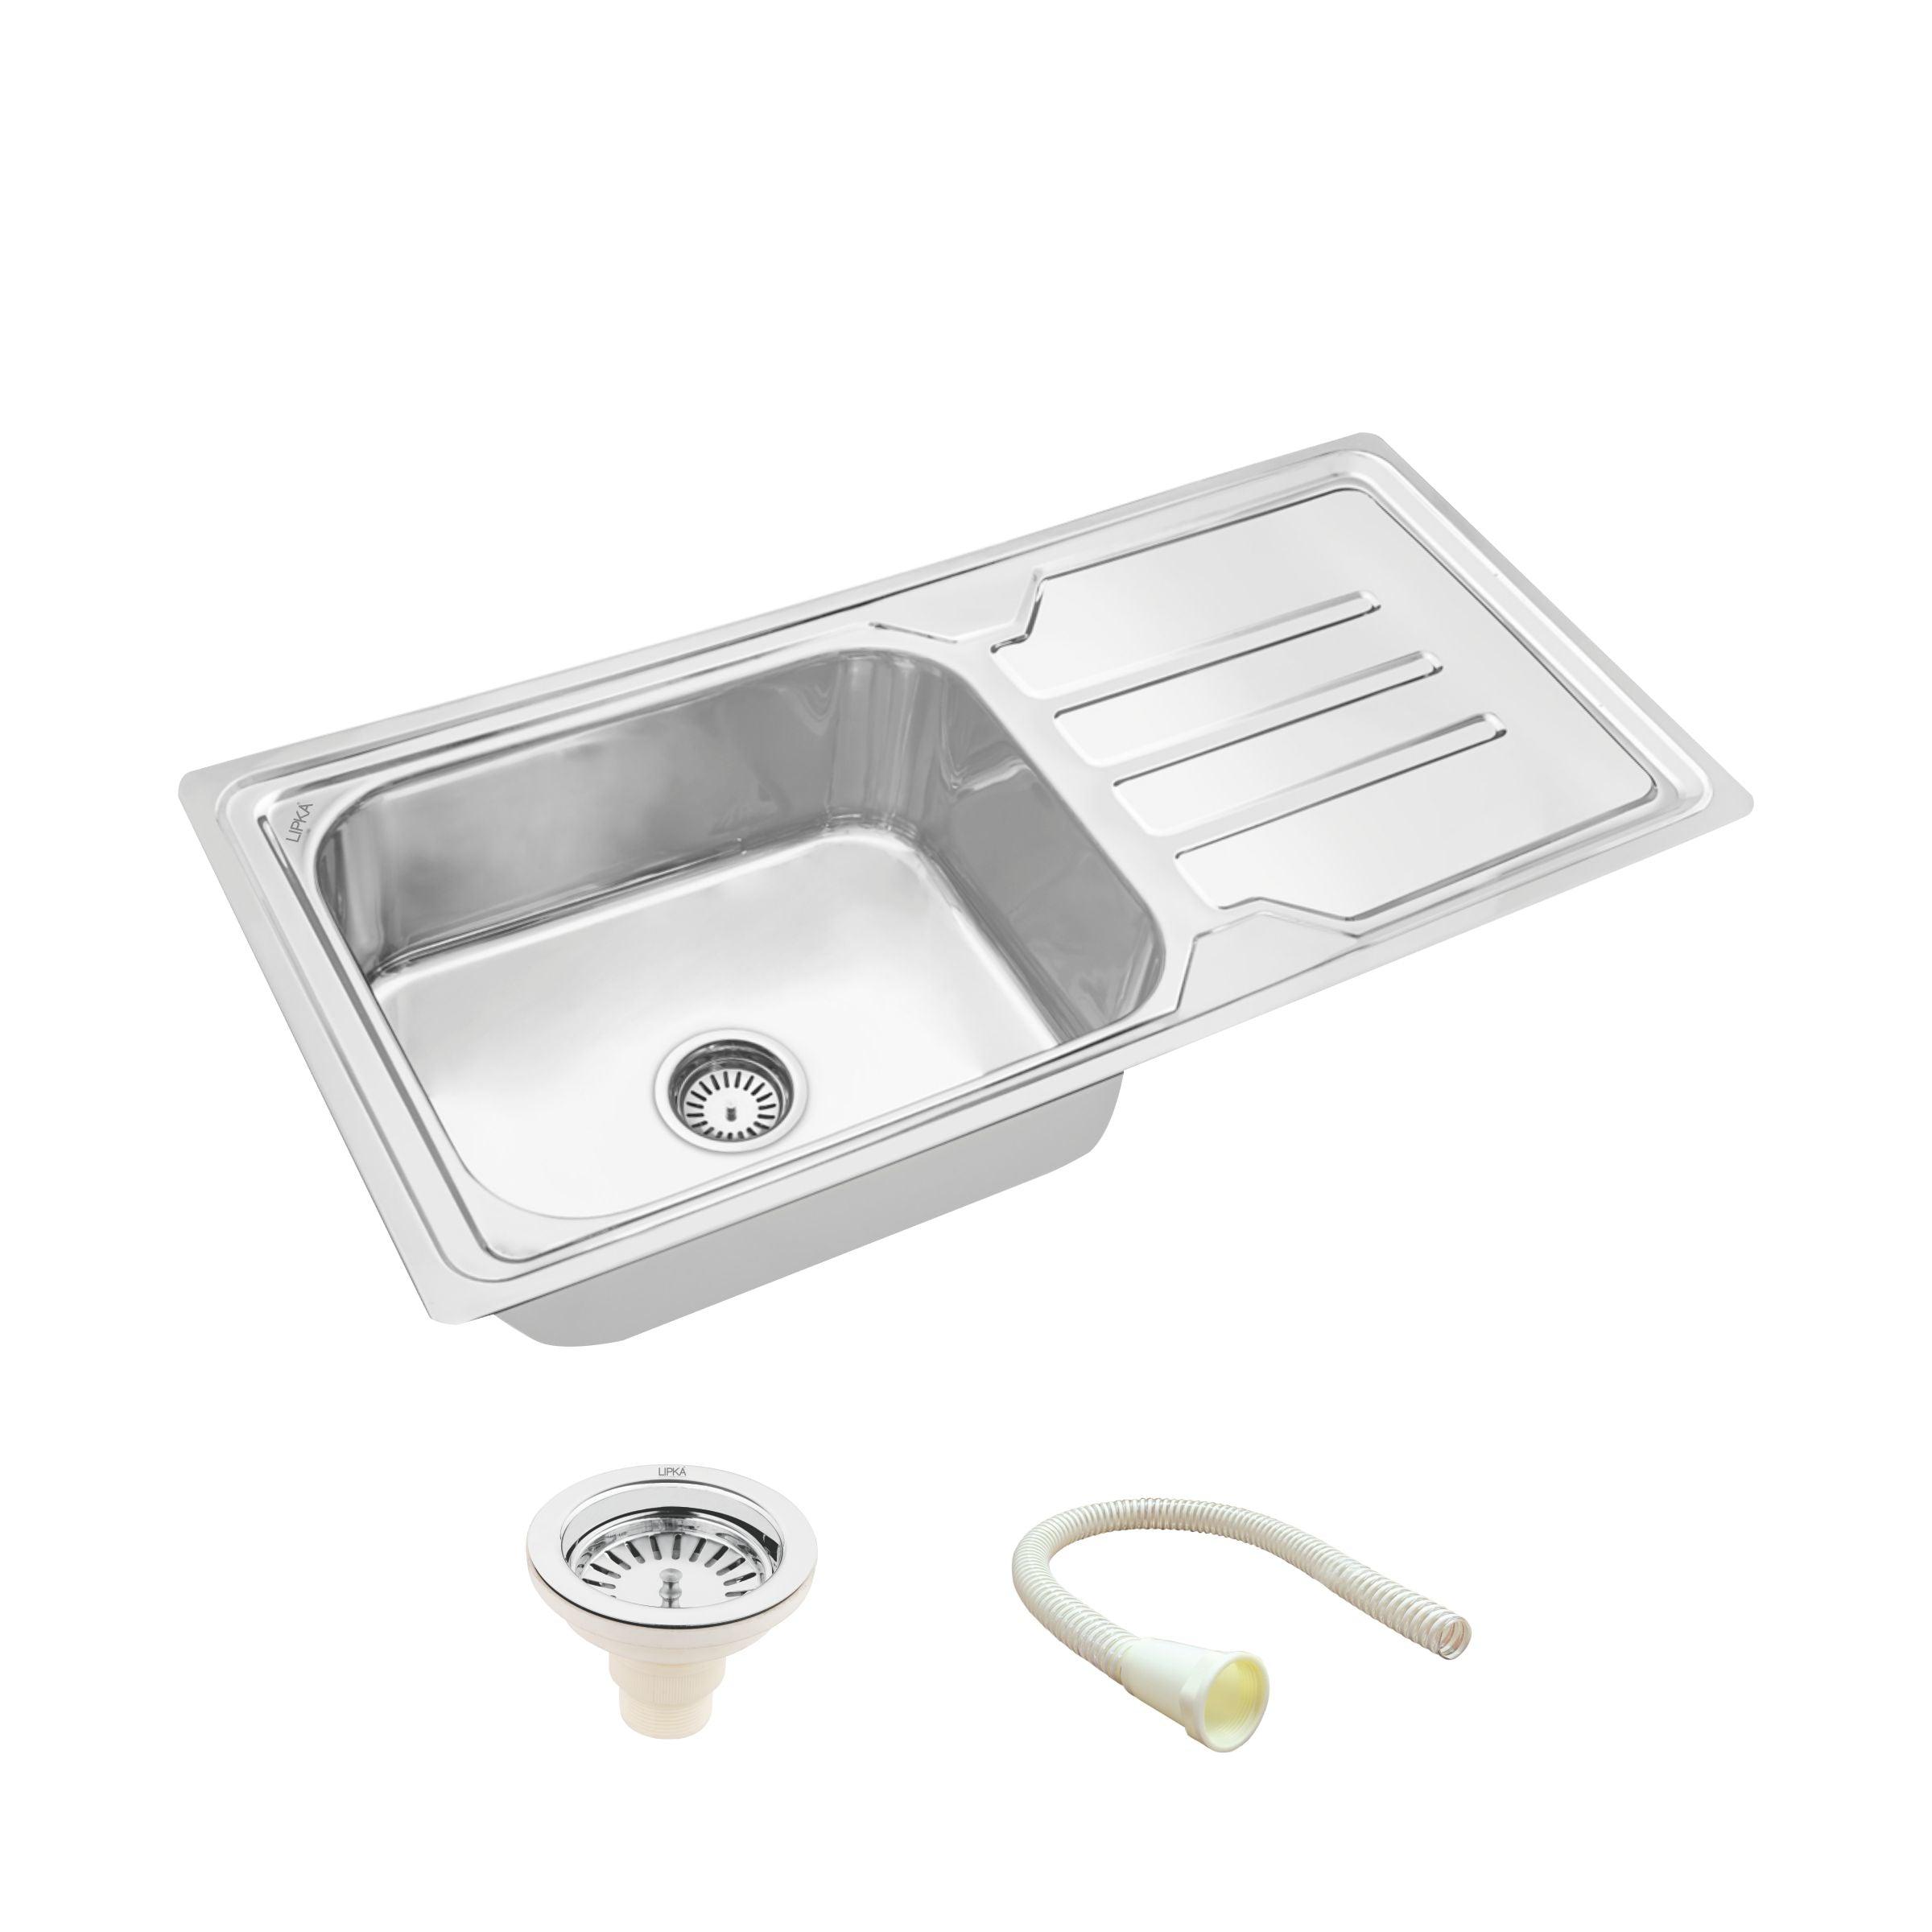 Square Single Bowl Kitchen Sink with Drainboard (42 x 20 x 9 Inches) - LIPKA - Lipka Home